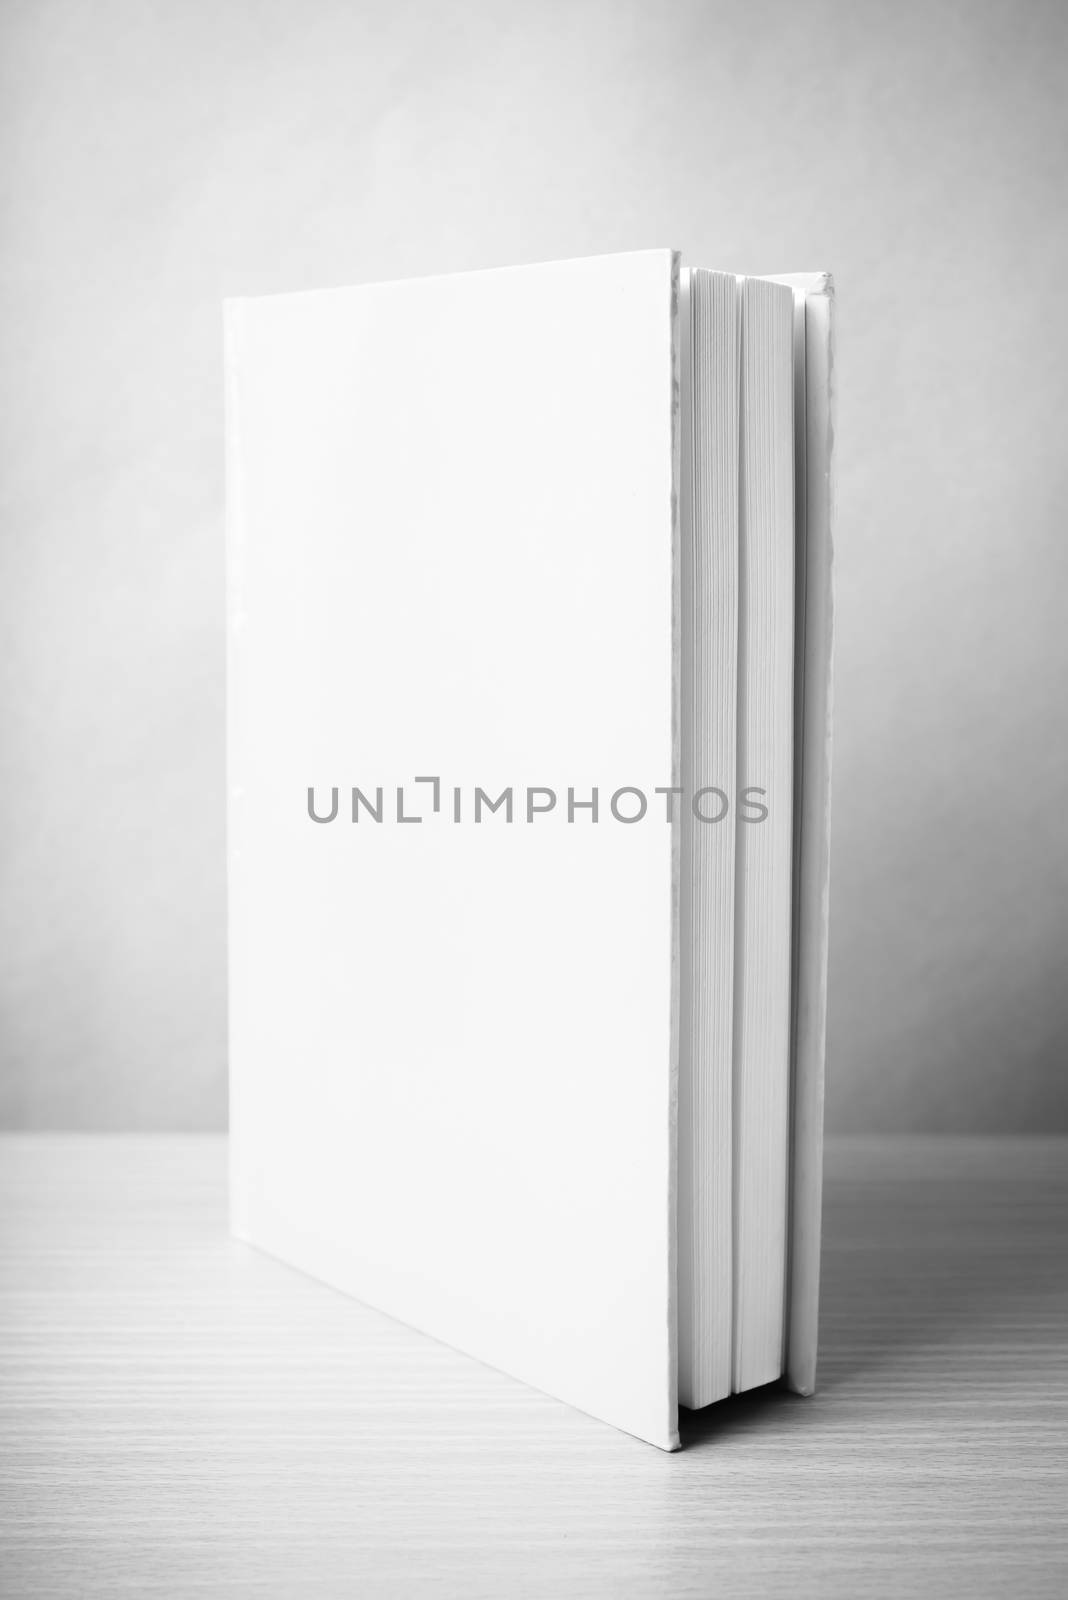 book on wood table background black and white color tone style